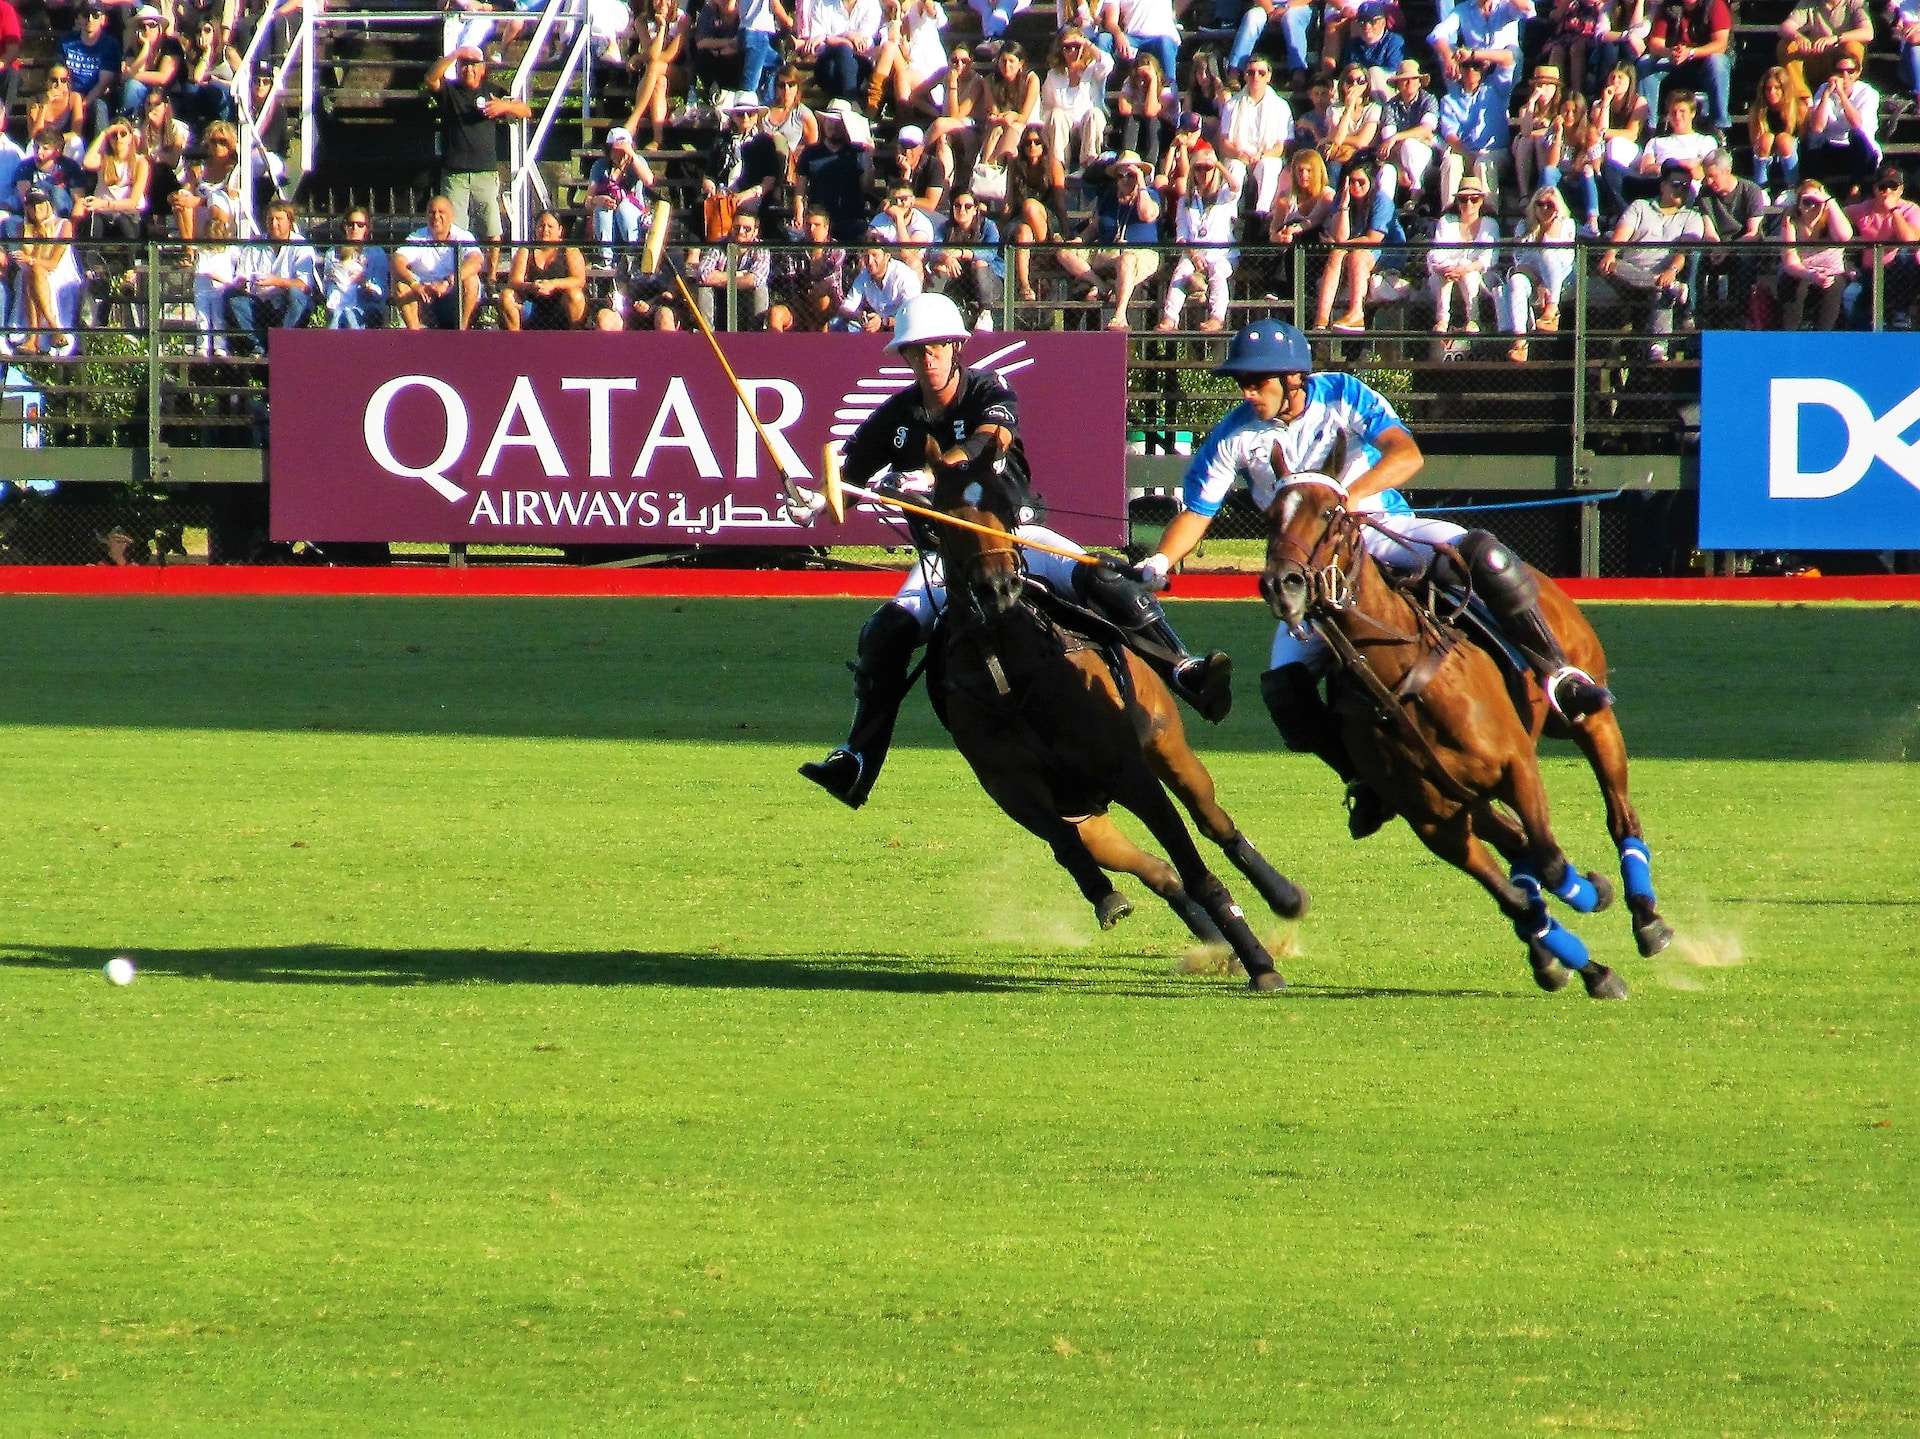 equestrian sports in college may include polo - image of polo players